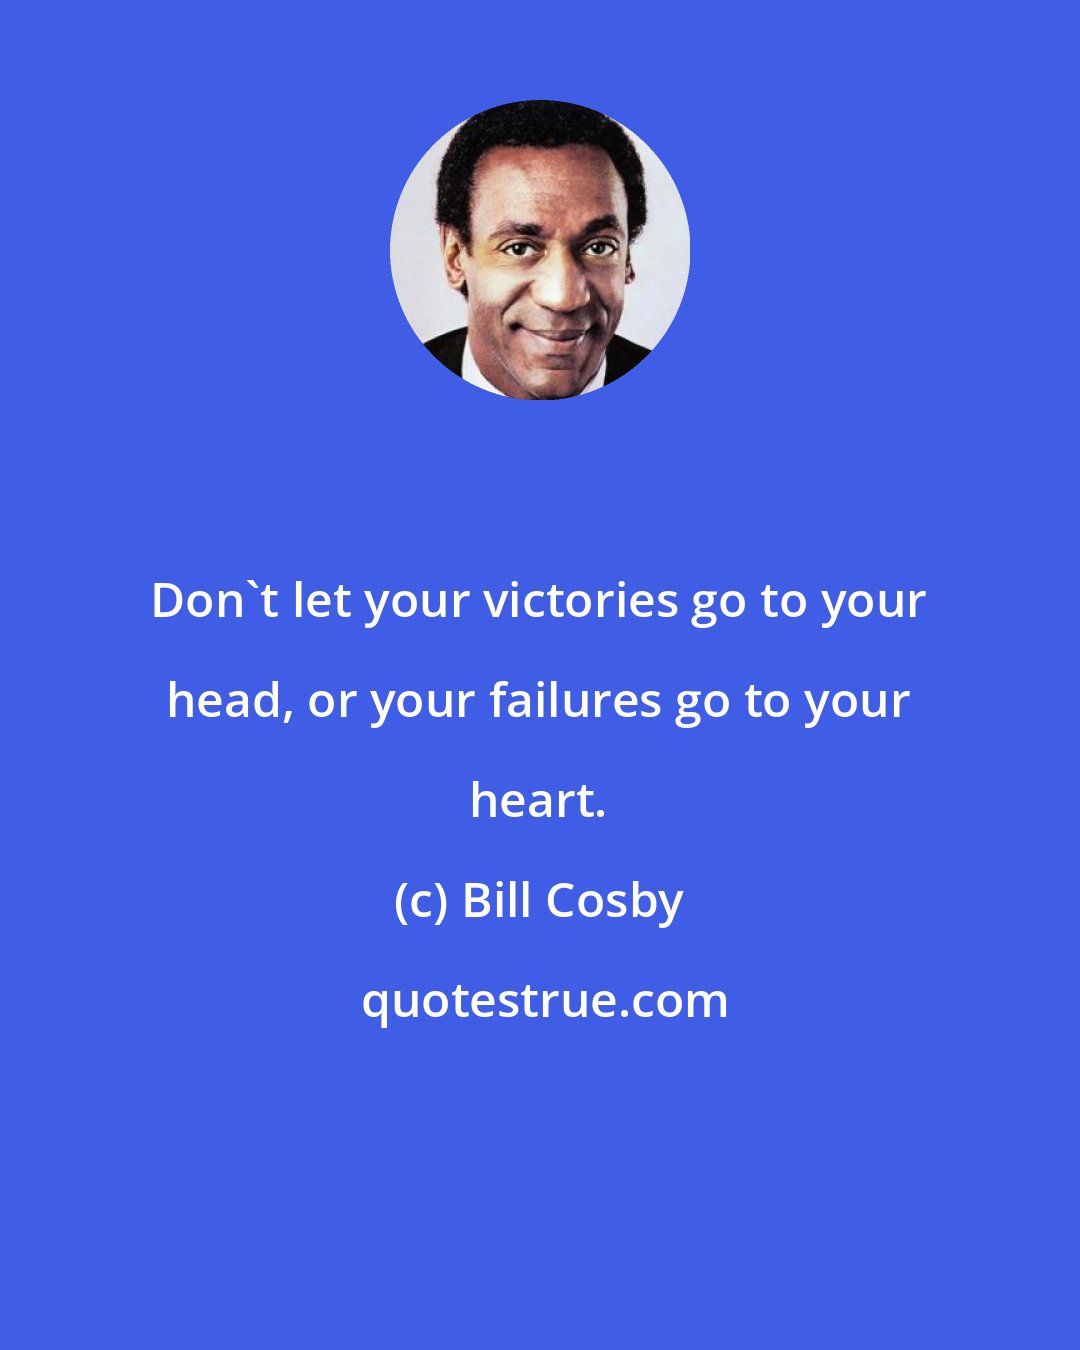 Bill Cosby: Don't let your victories go to your head, or your failures go to your heart.